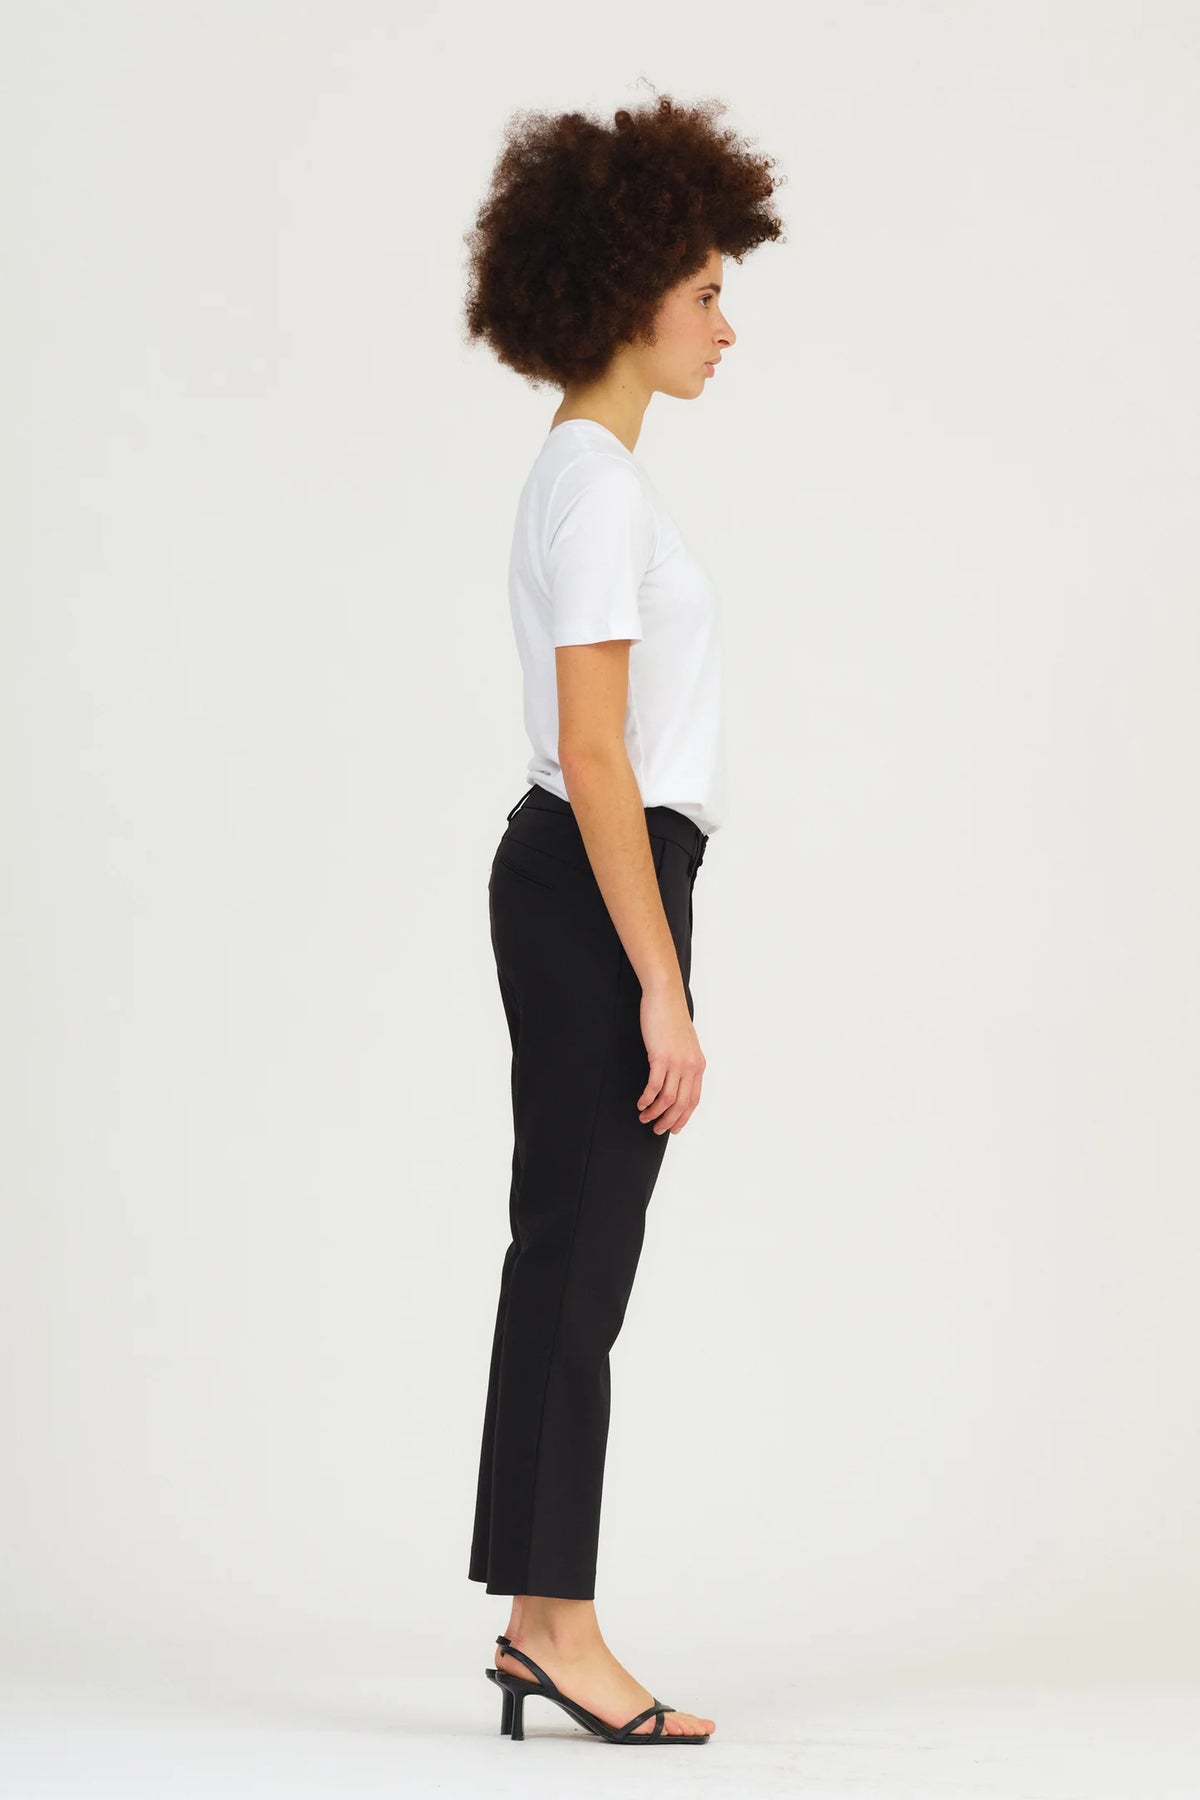 IVY Alice Cropped Flare Pant